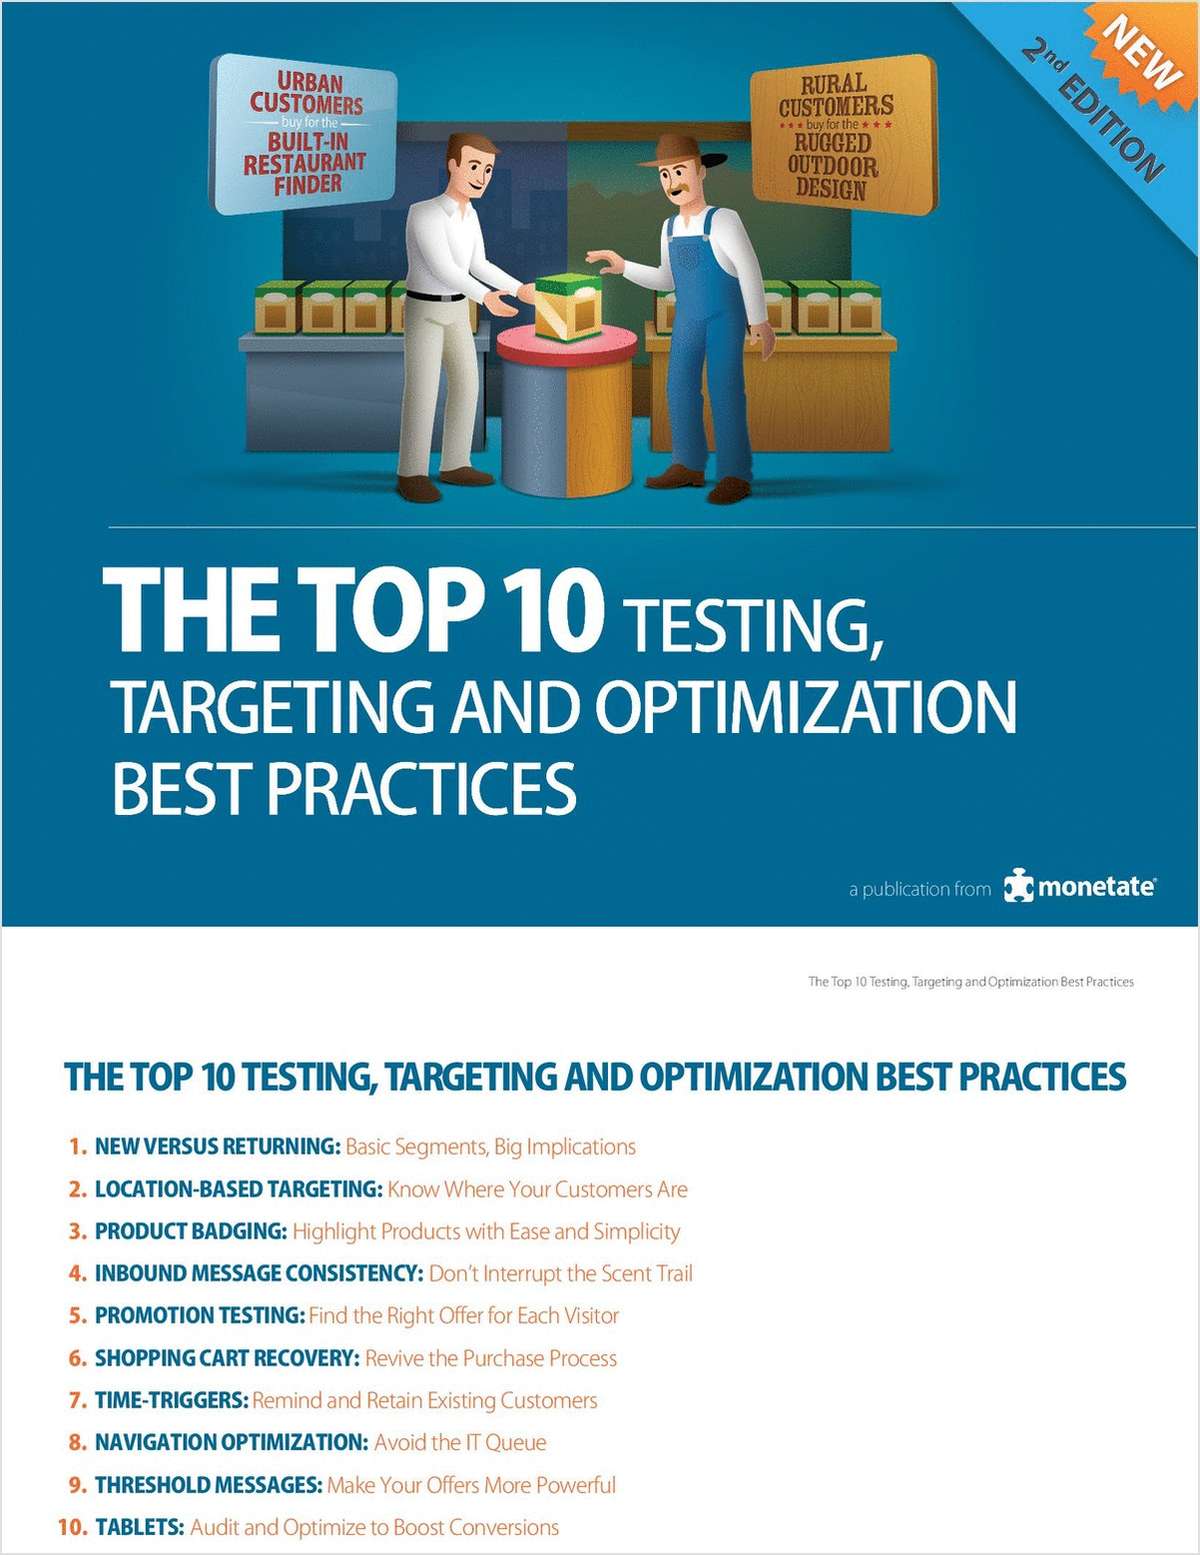 10 Best Practices For Website Testing, Targeting and Optimization